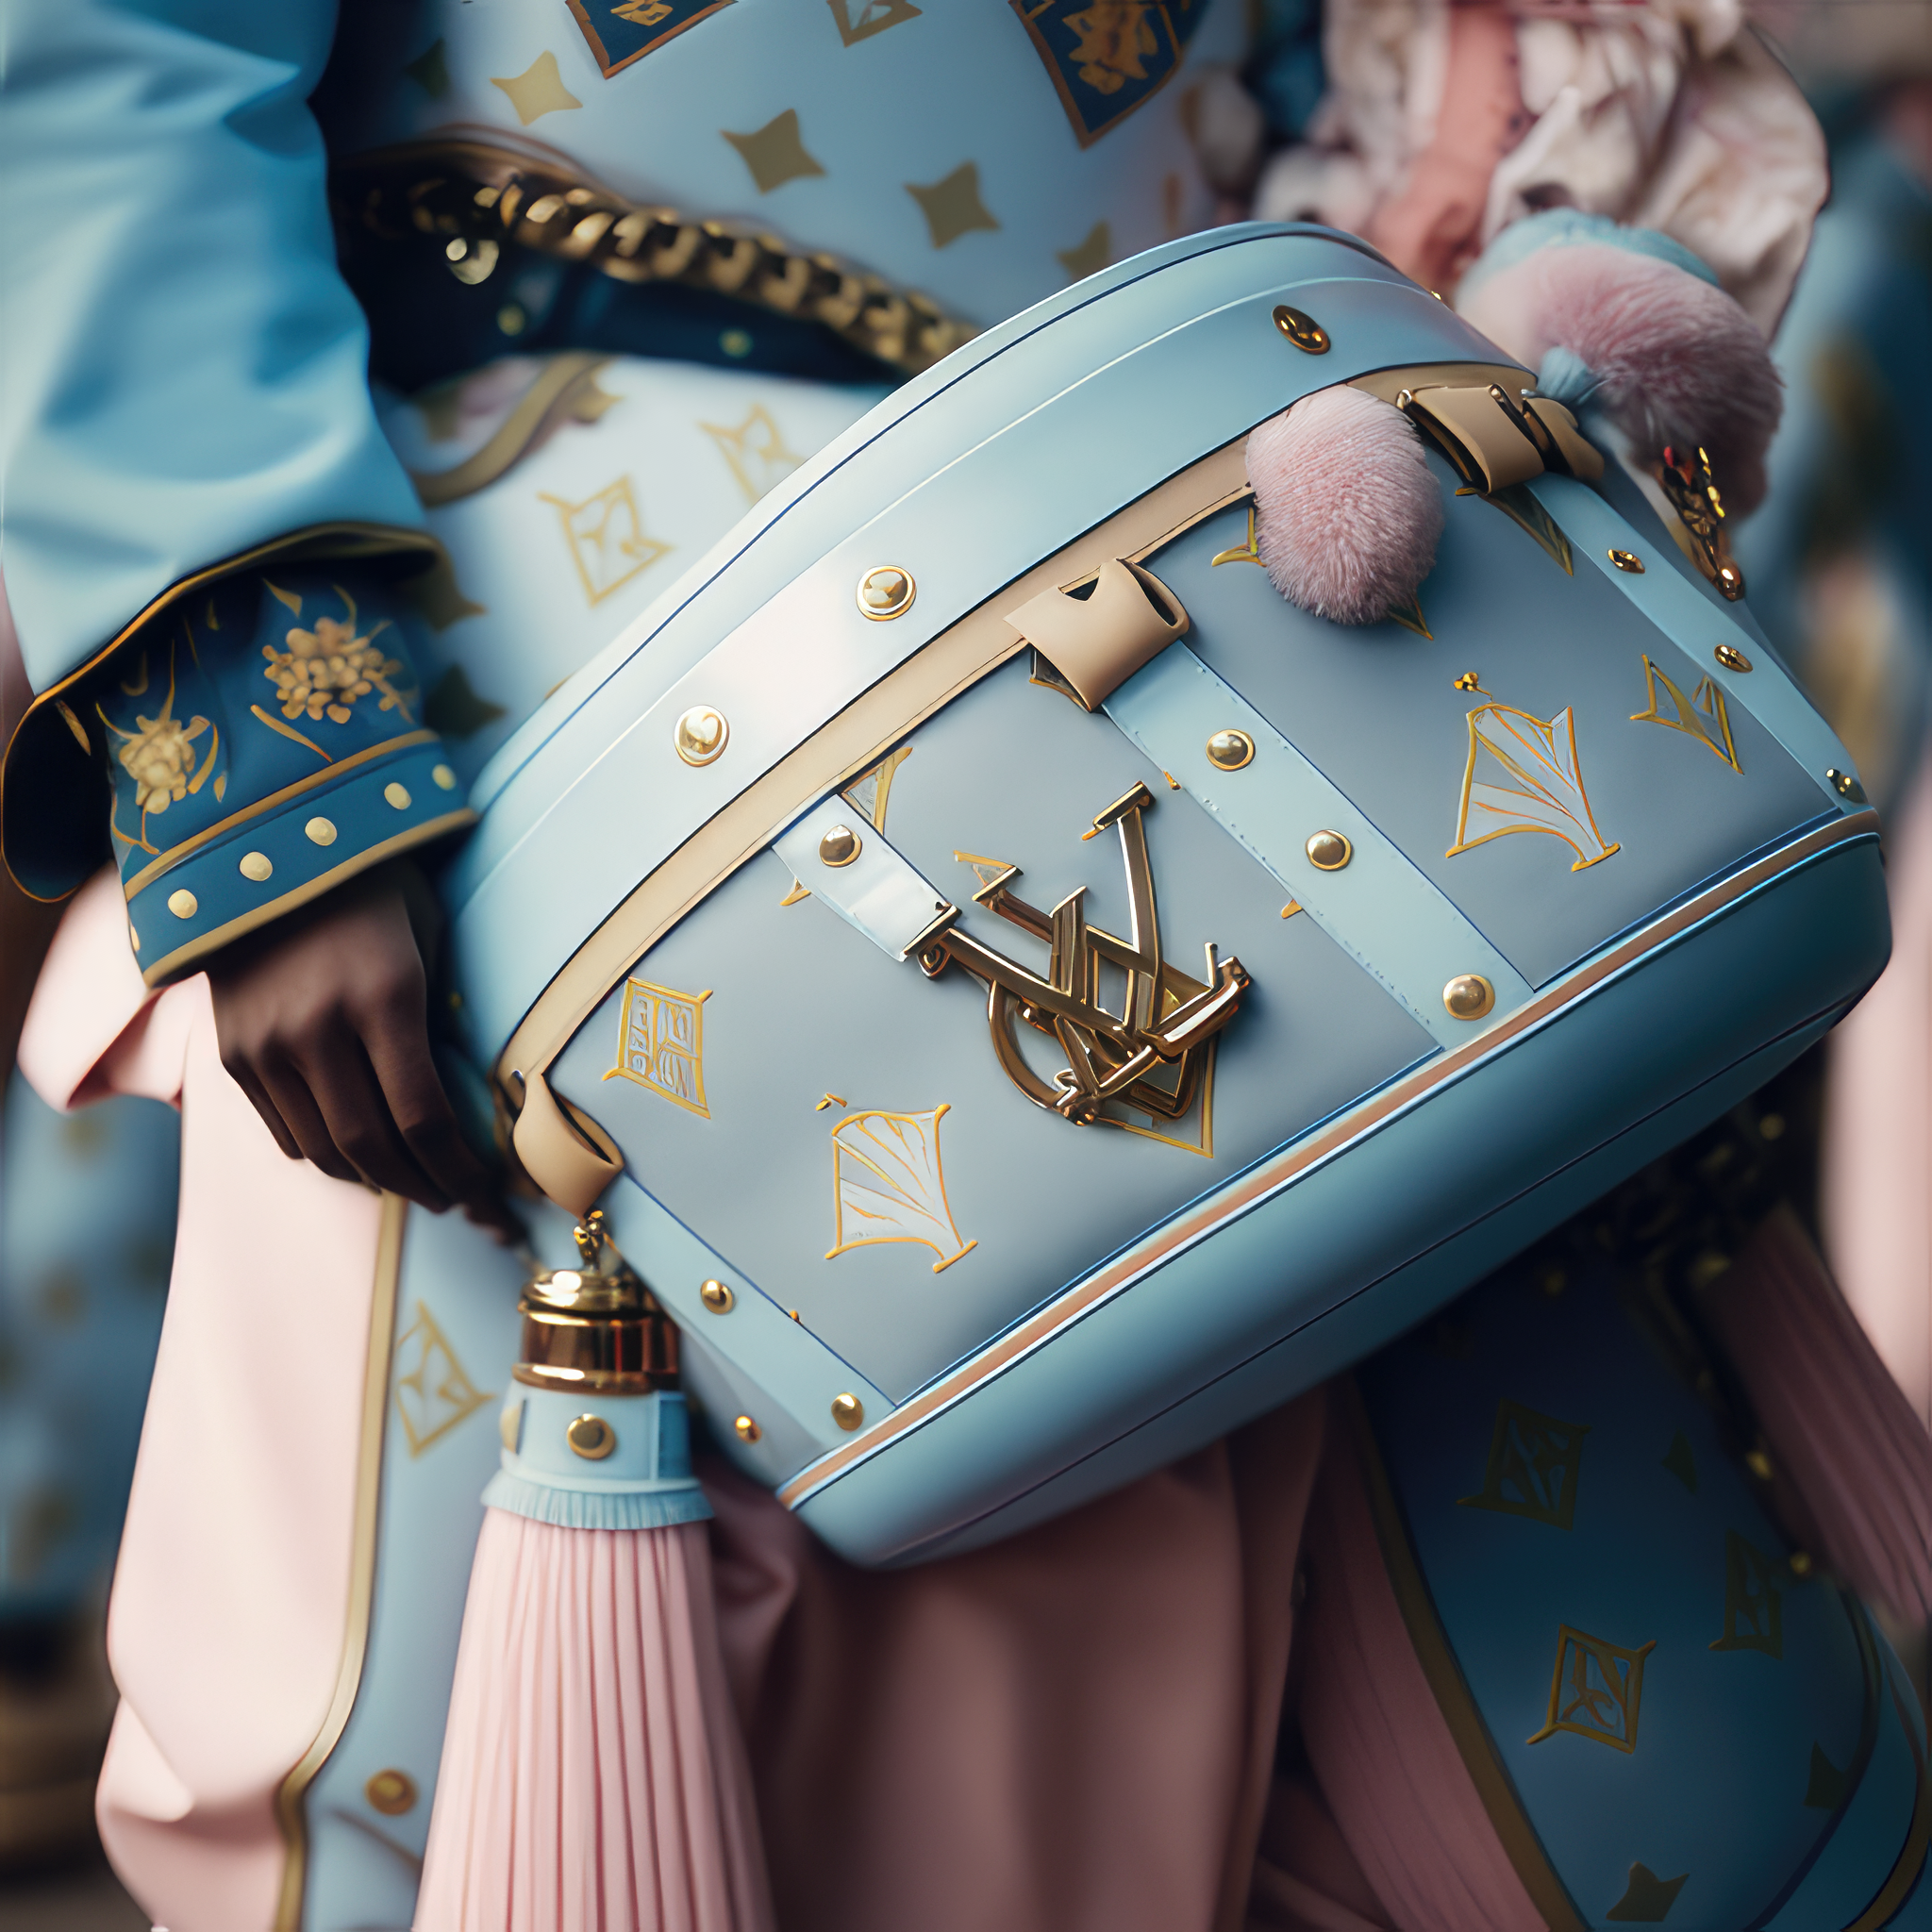 tonycncp_Heavily_branded_Louis_Vuitton_Luxury_pastel_streetwear_27311d1c-bc9f-46c2-a428-463542164aa2-gigapixel-standard-scale-4_00x.png